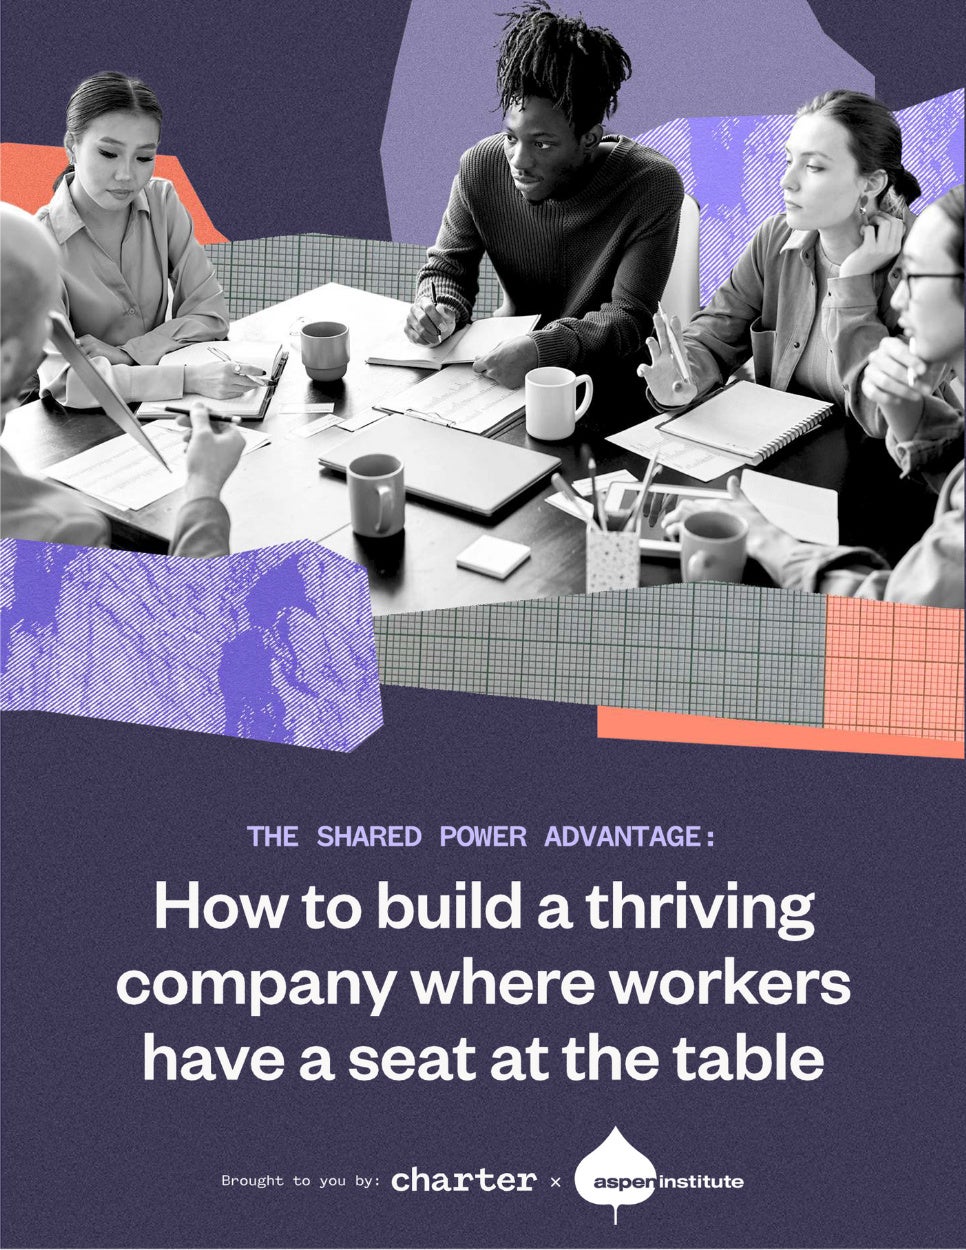 The Shared Power Advantage: How to build a thriving company where workers have a seat at the table